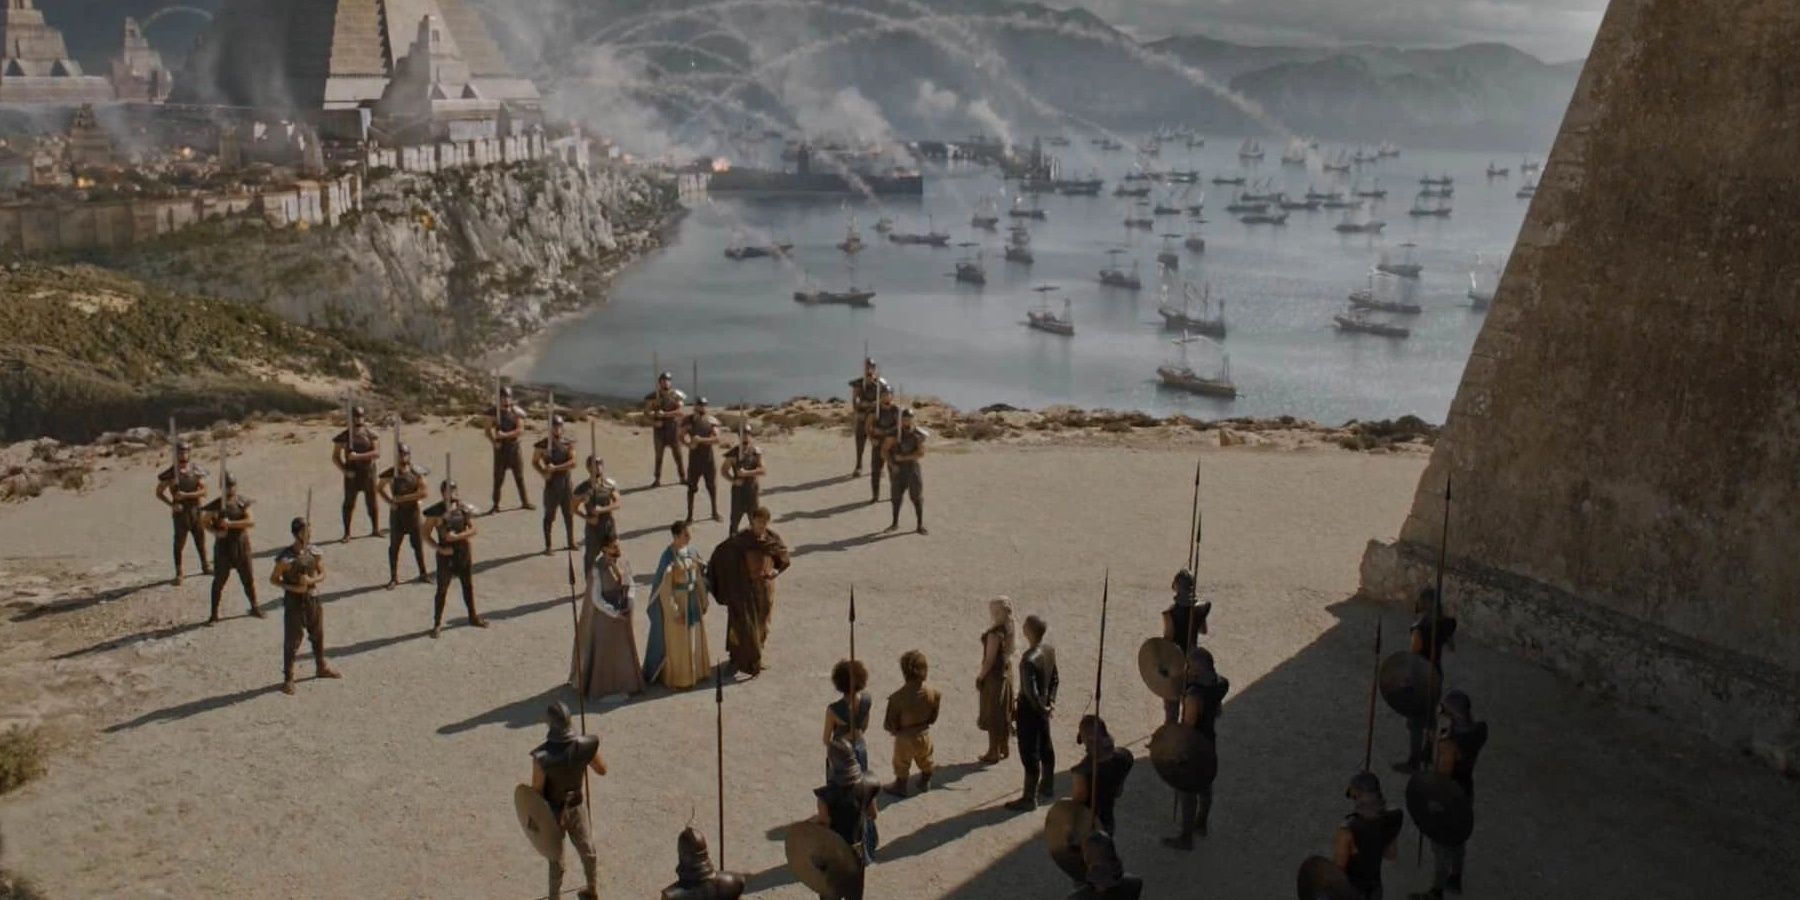 Daenerys Targaryen's forces meet with the slavers with war in the background